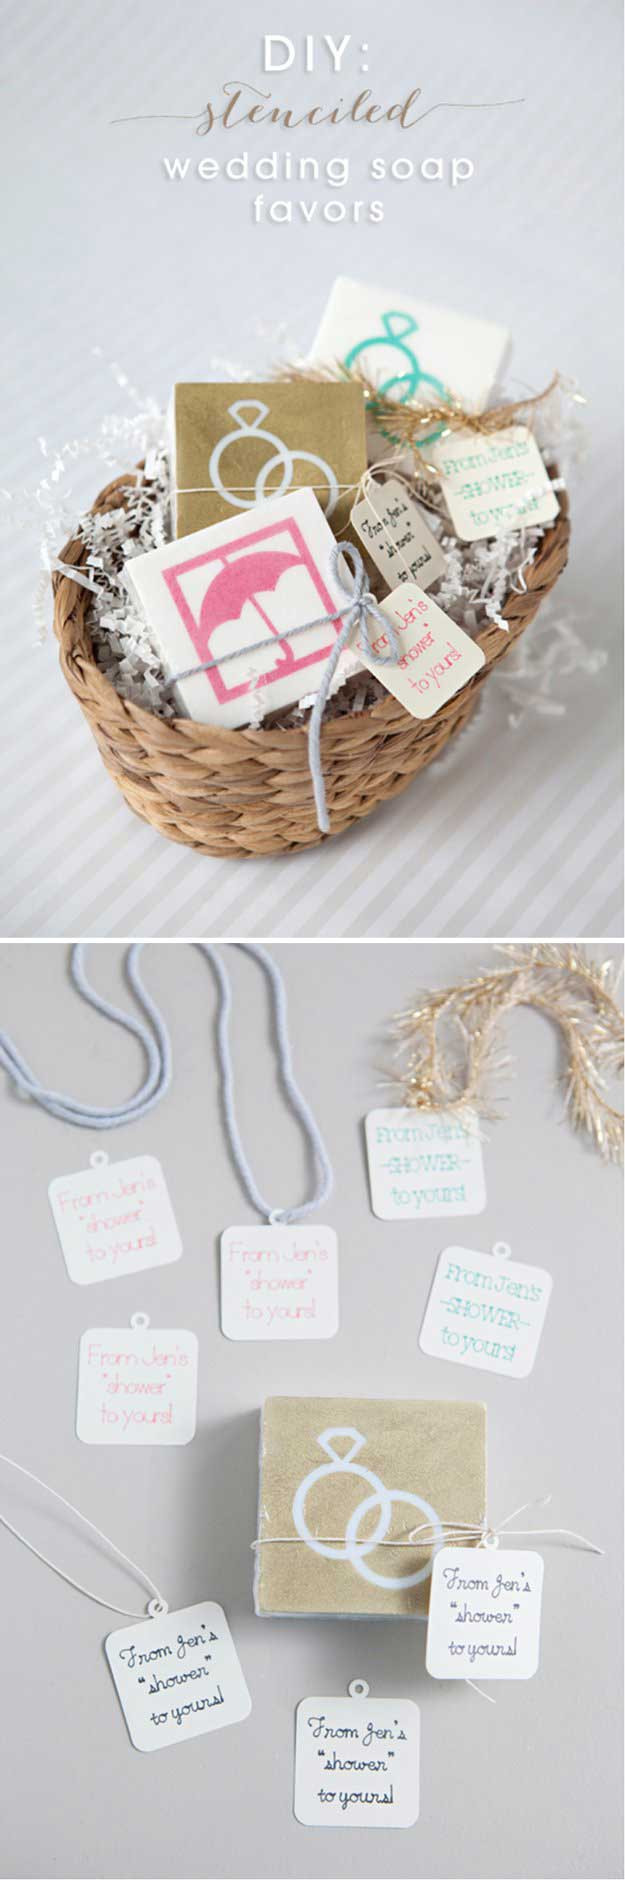 Homemade Wedding Gifts
 17 Wedding Favor bags Ideas to Save Money